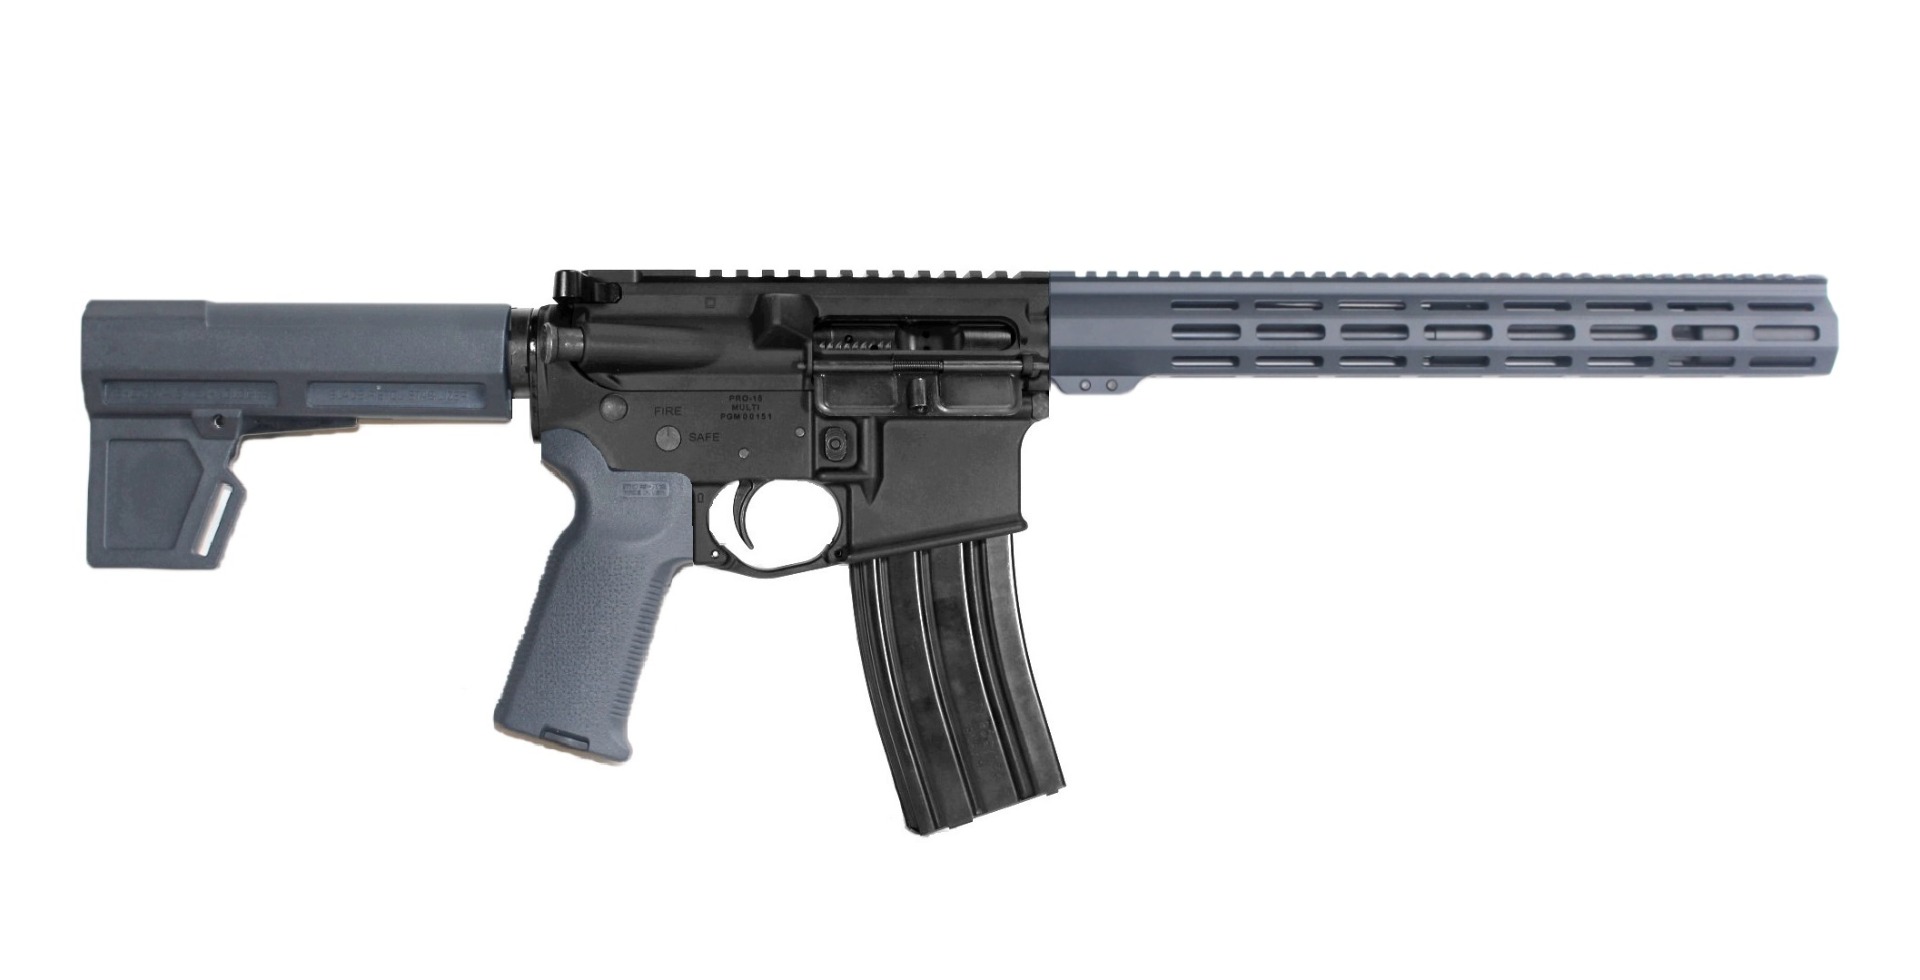 12.5 inch 6.5 Grendel AR Pistol | Made in the USA